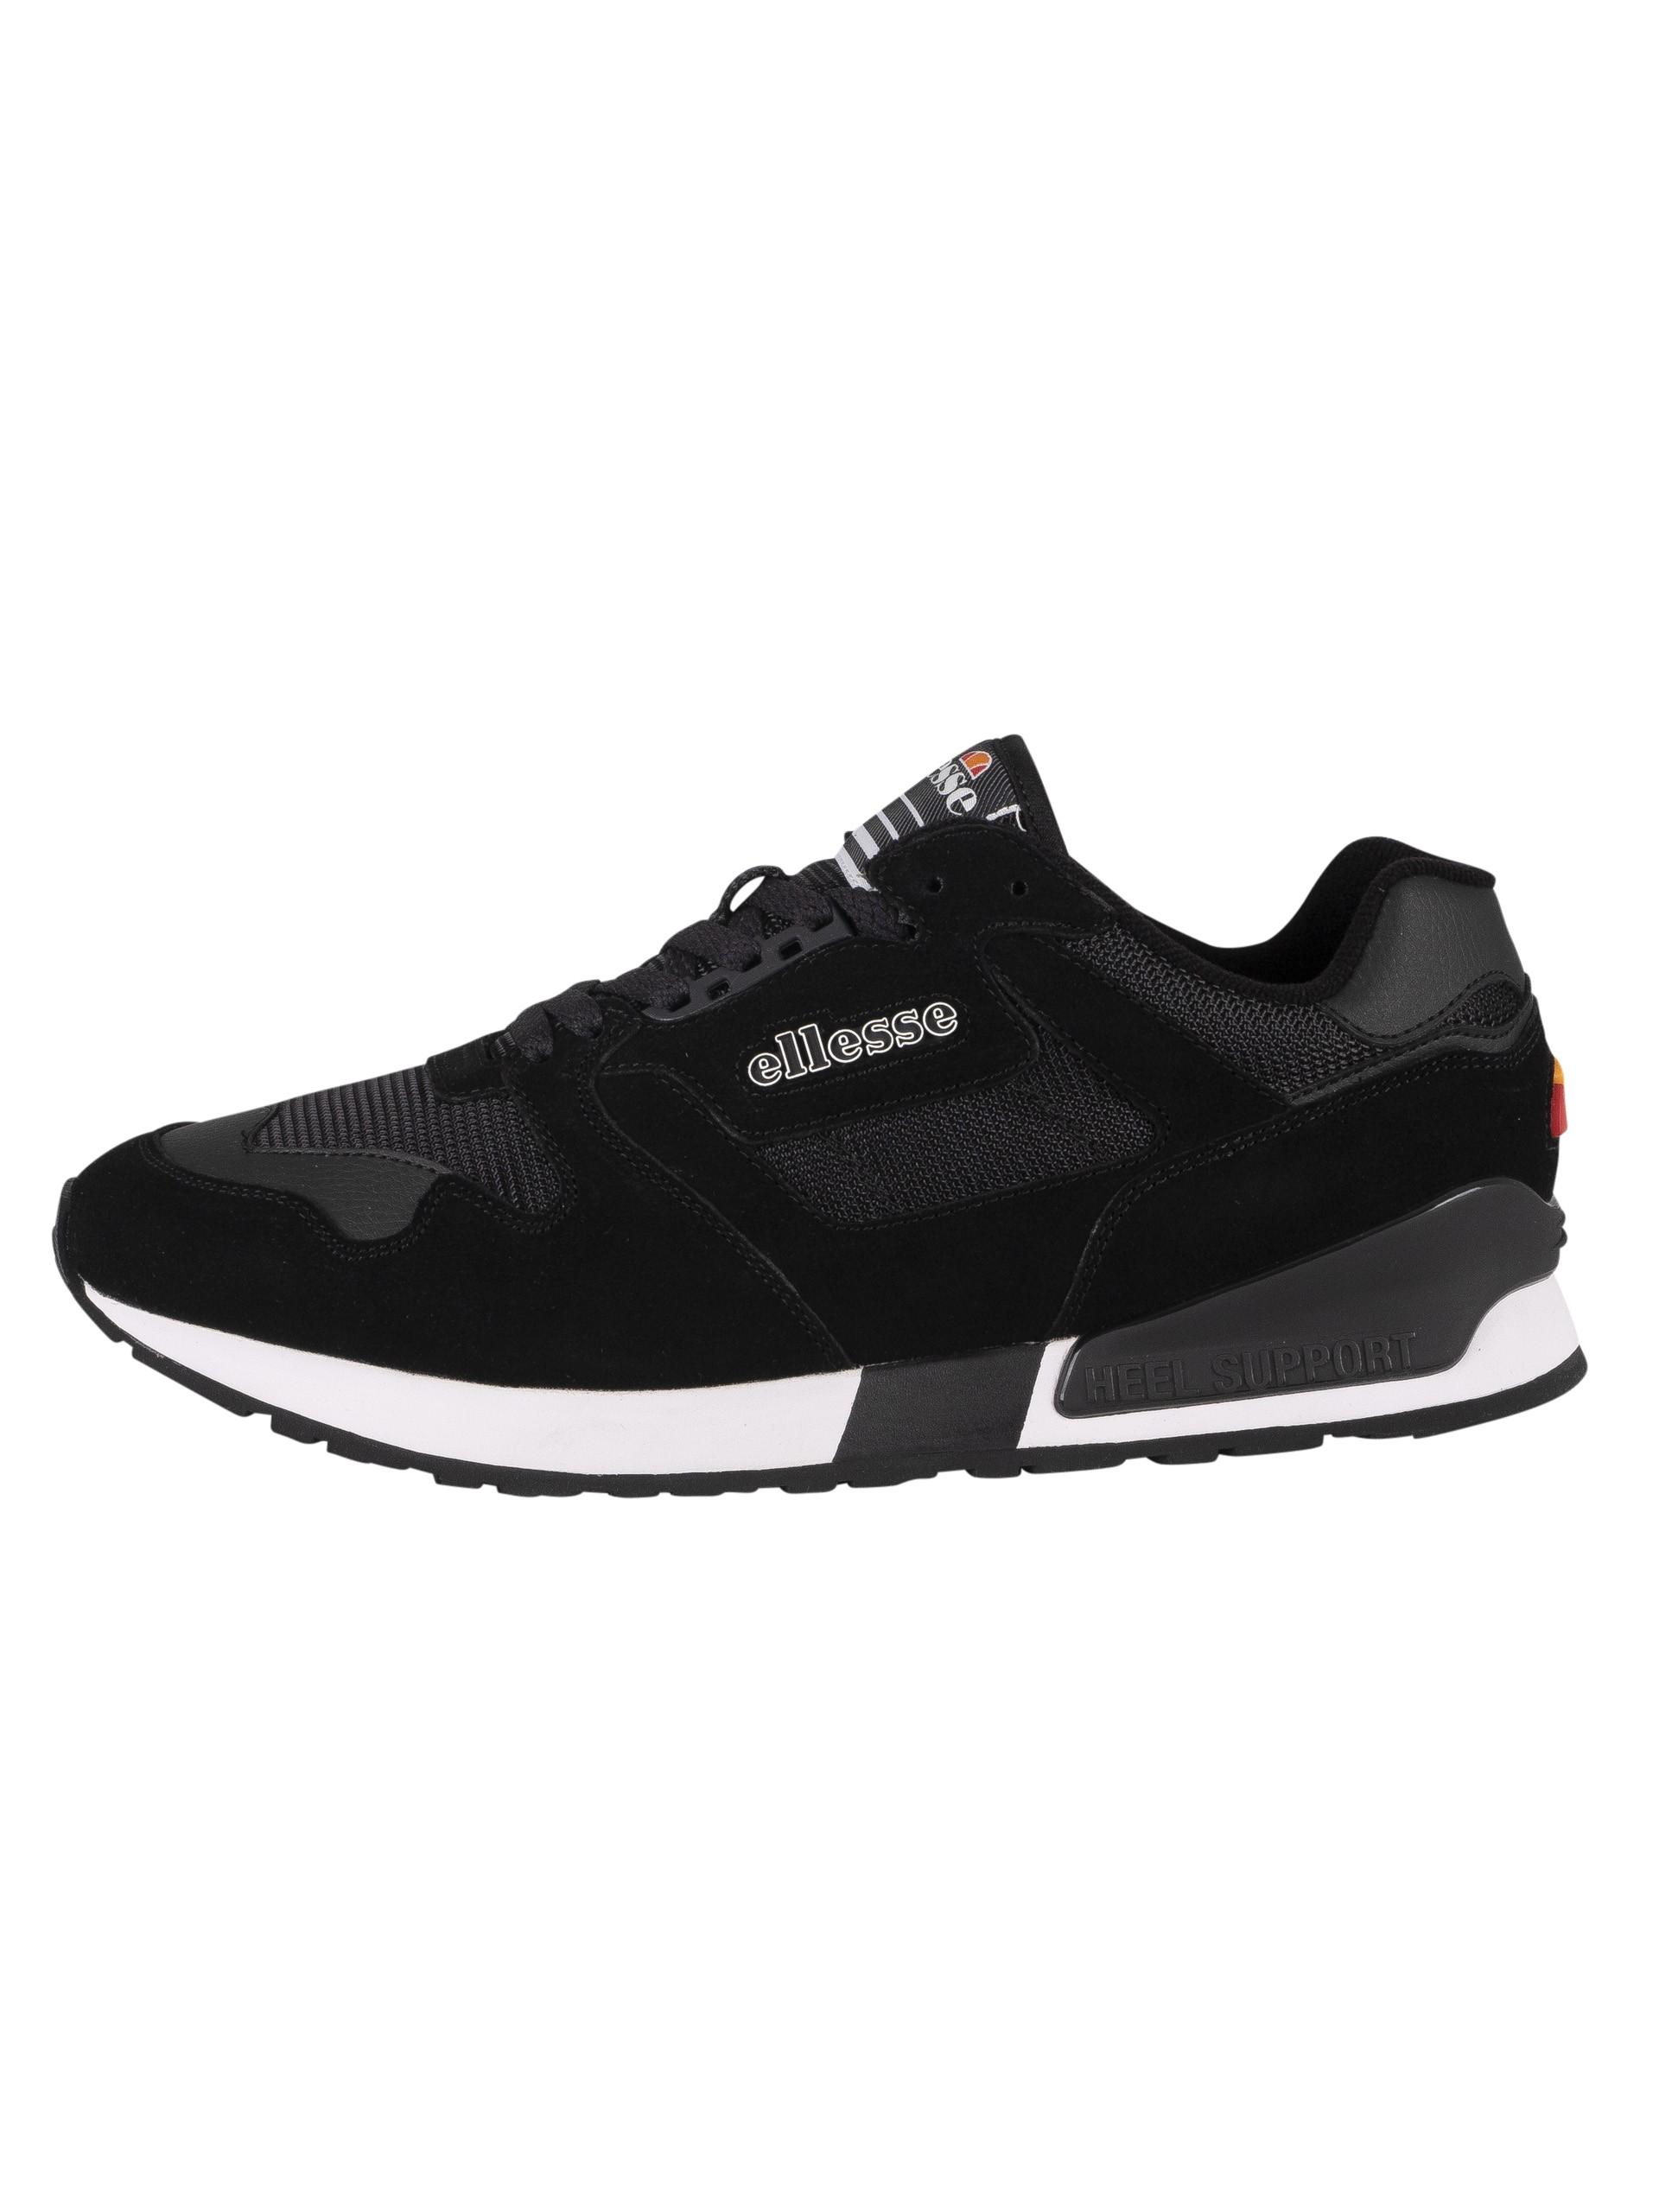 Ellesse 147 Suede Trainers in Black/White (Black) for Men | Lyst